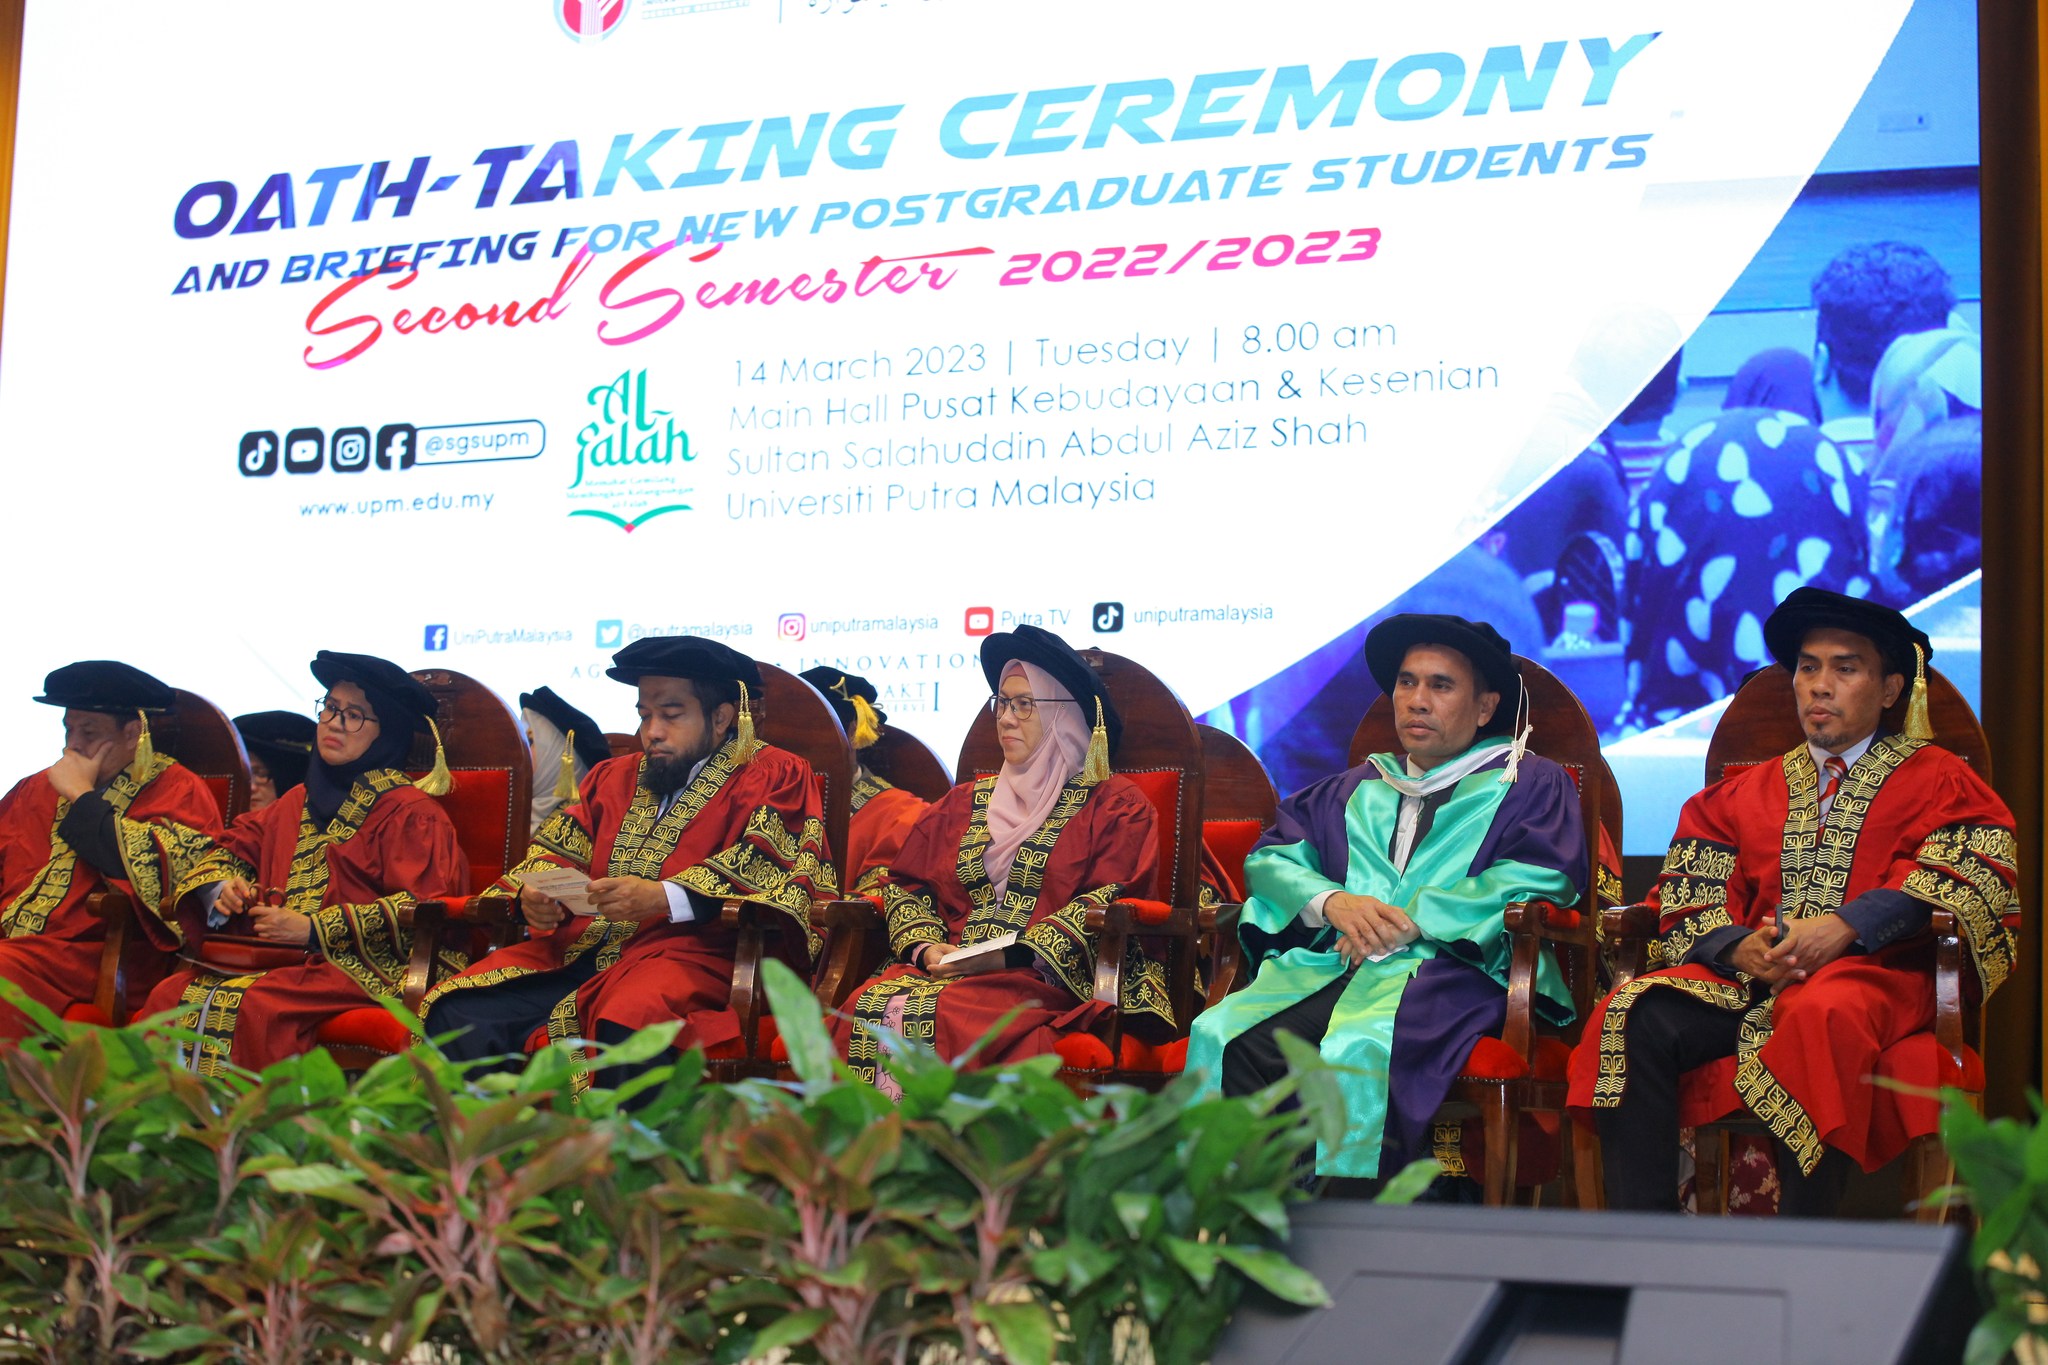 Oath Taking Ceremony and Briefing for New Postgraduates of Second Semester and Third Trimester of 2022/2023 Session